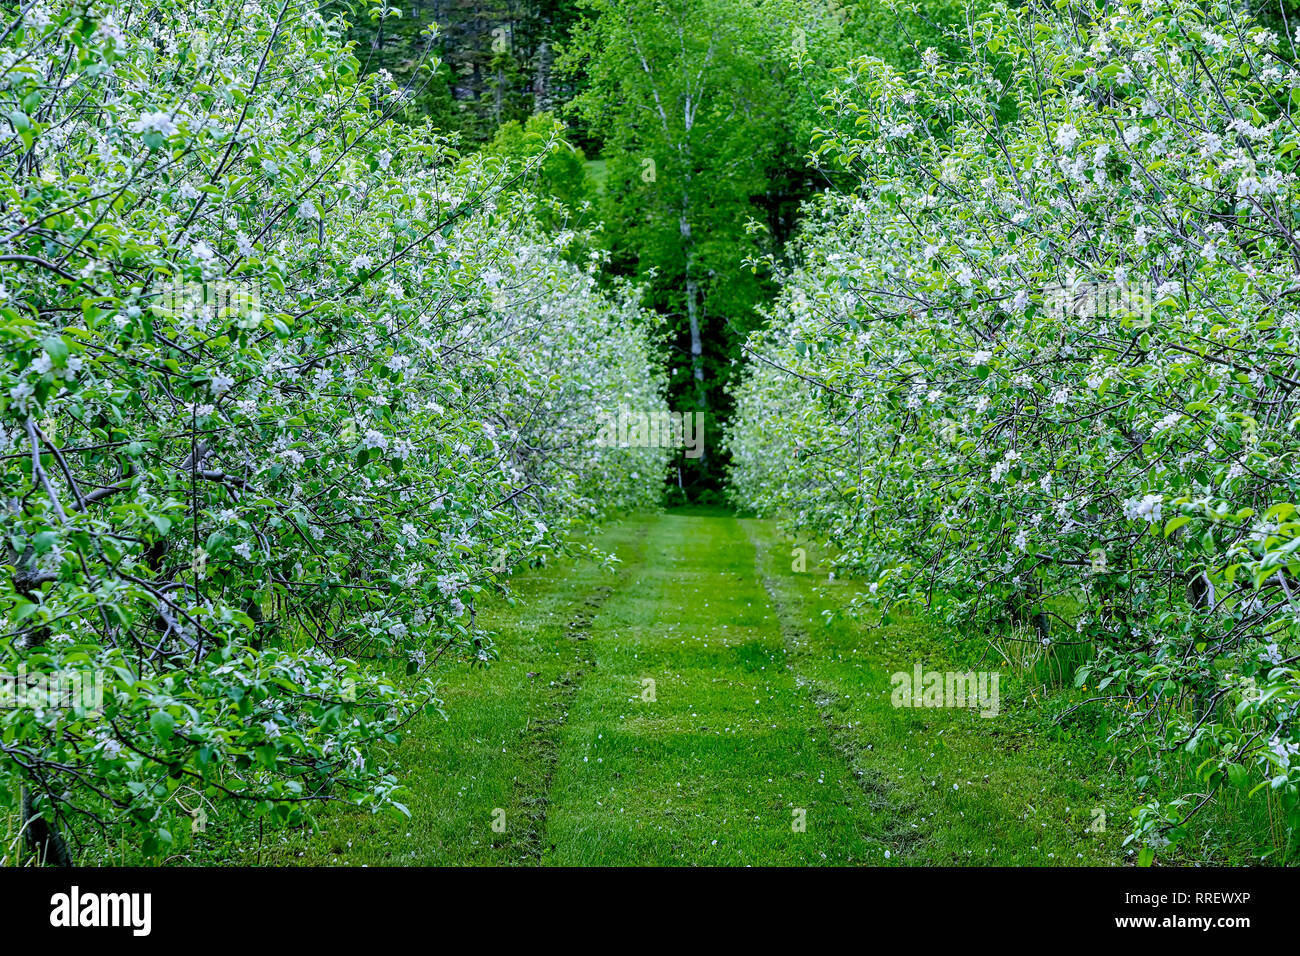 Rows of fruit trees in blossom. Stock Photo